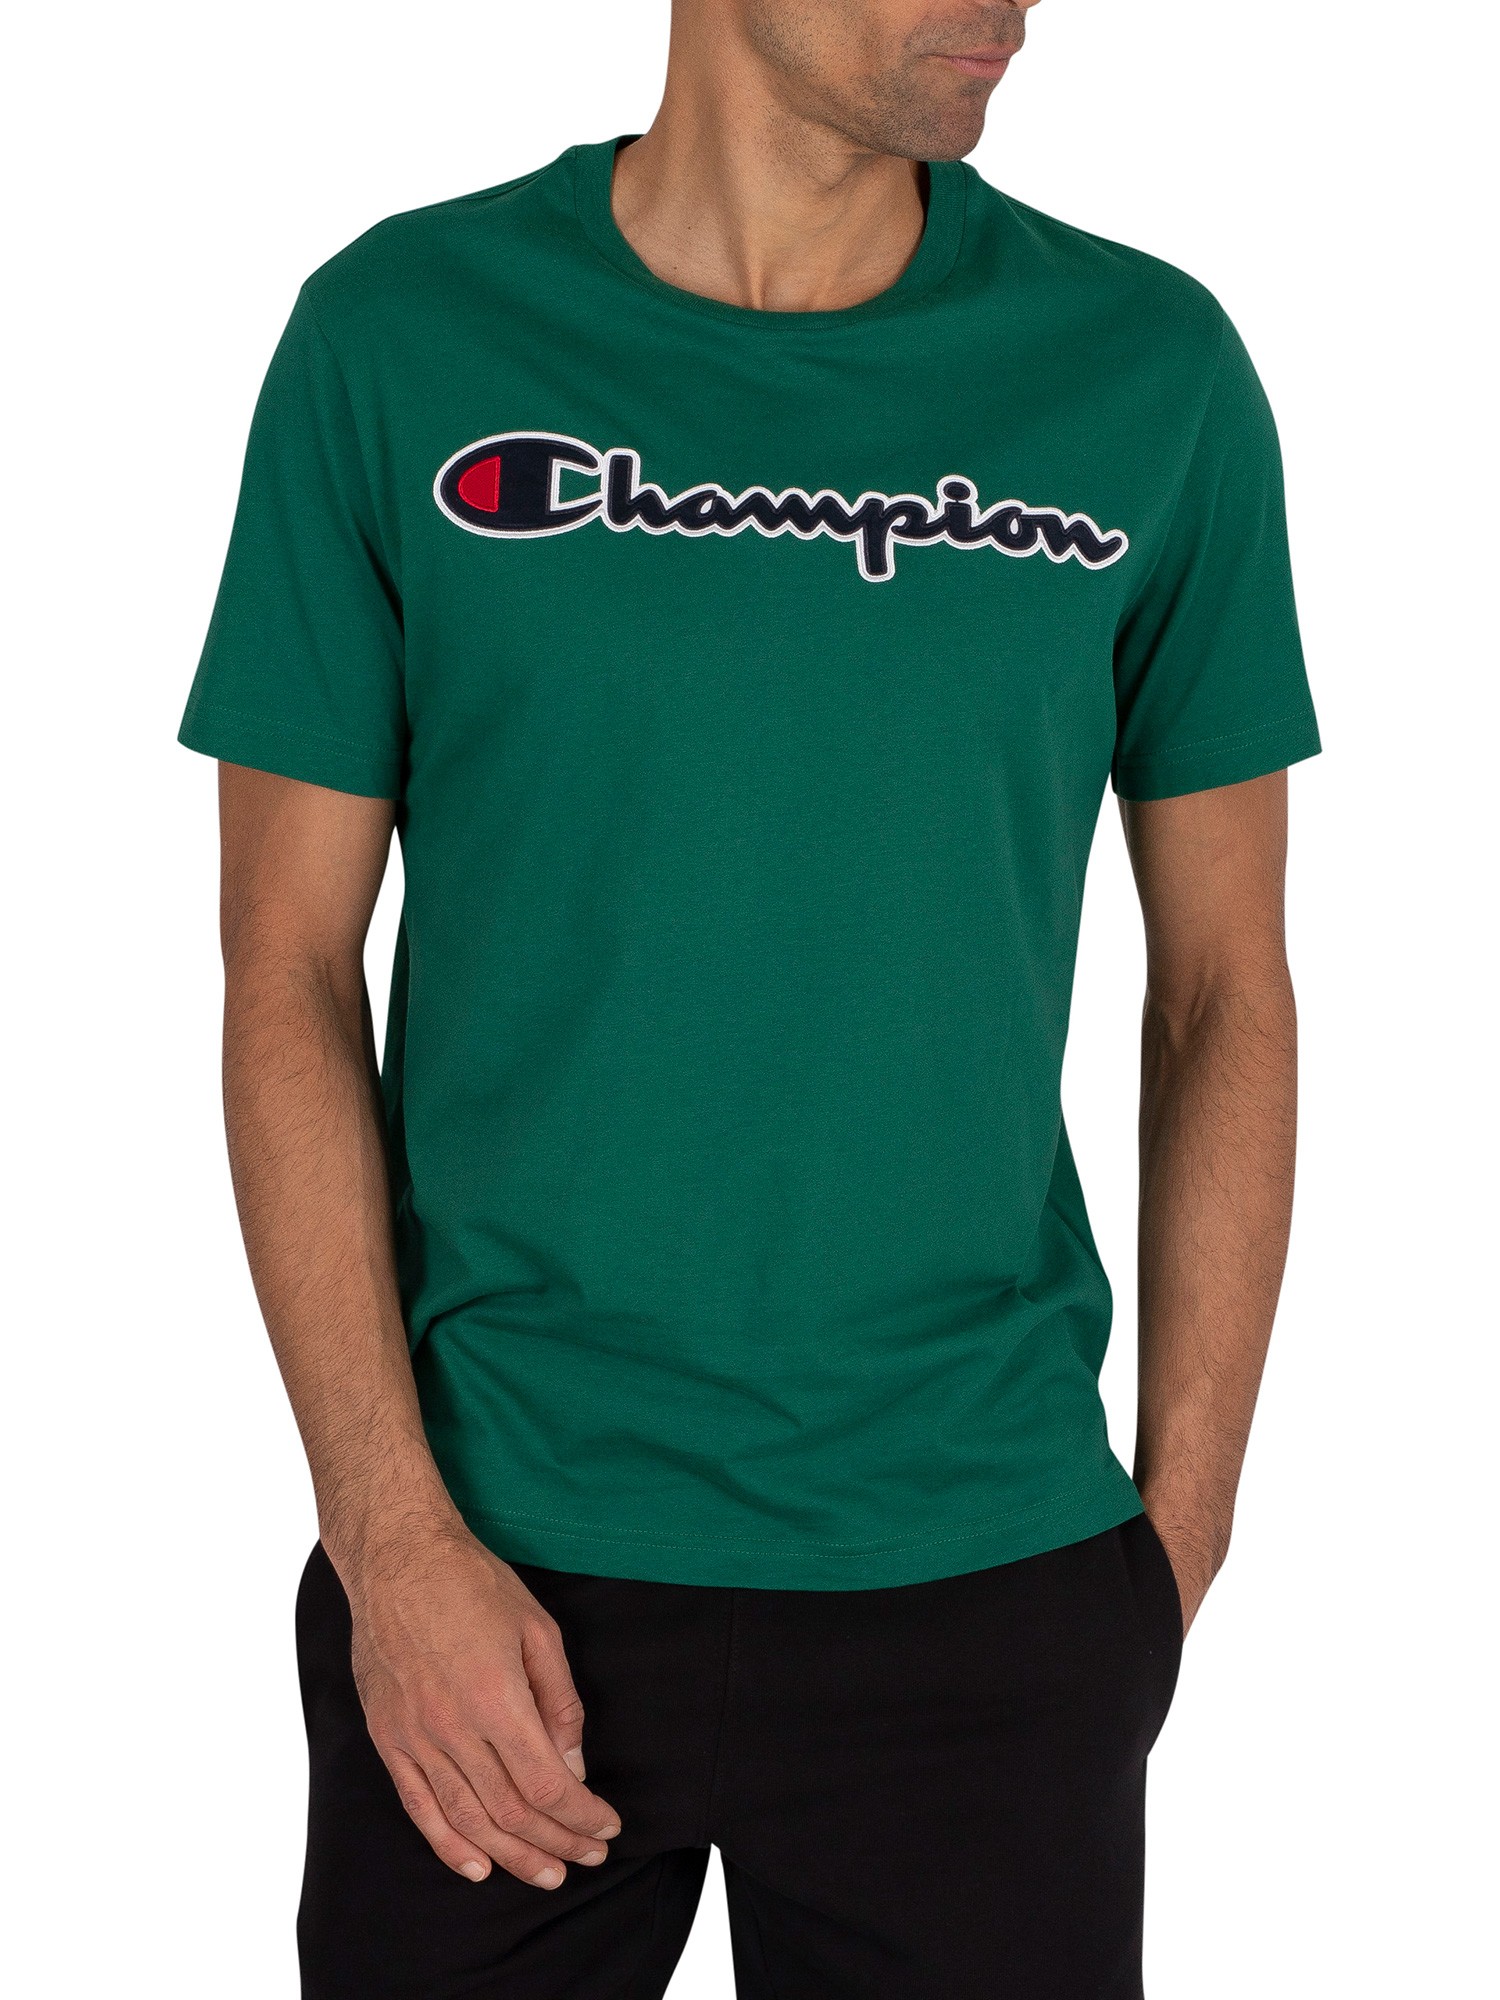 Champion Graphic T-Shirt - Green | Standout